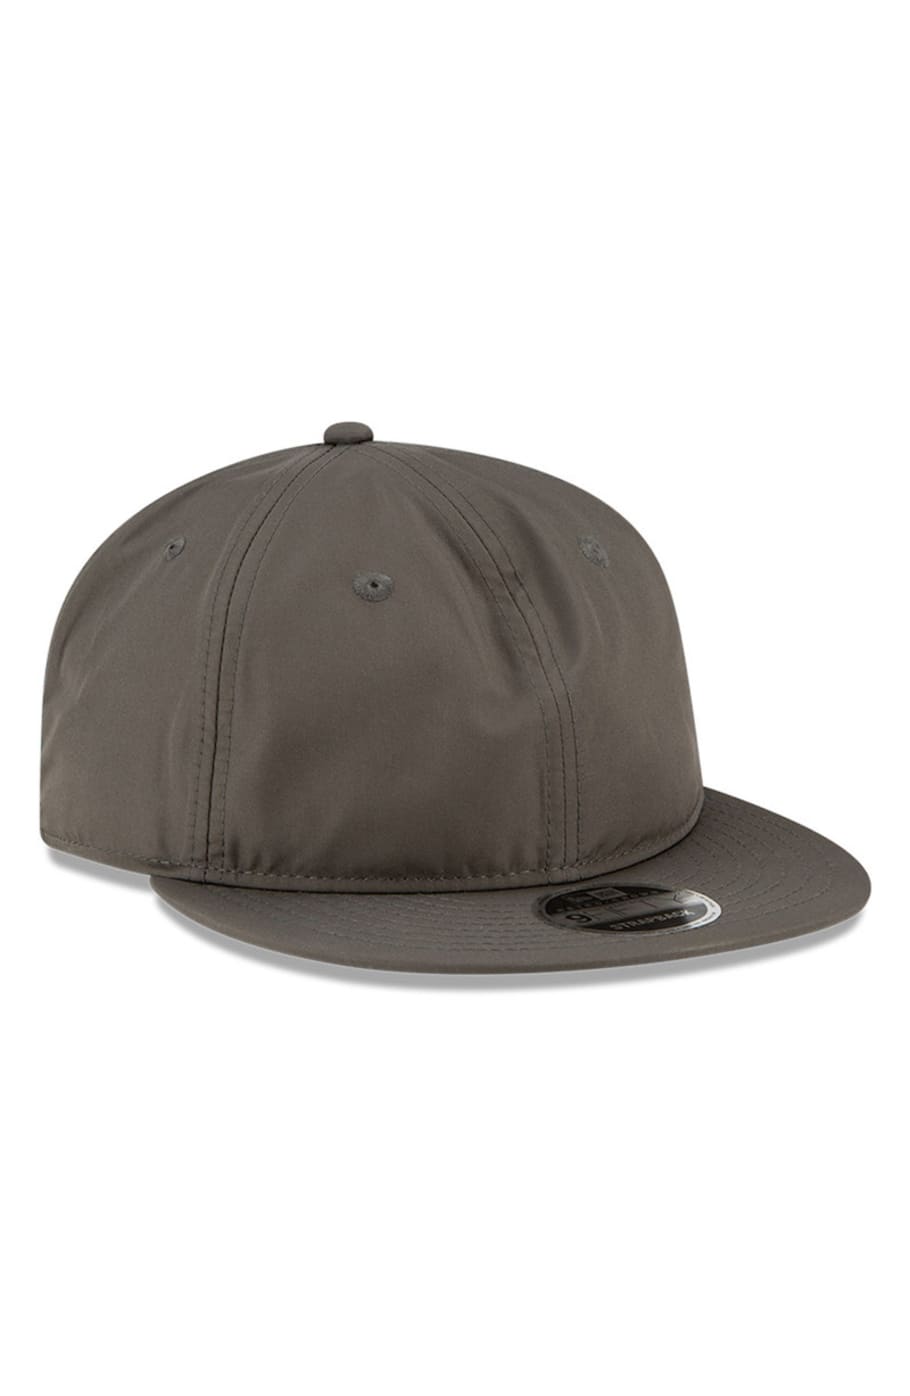 Fear of God Essentials Drops Baseball Cap Collaboration With New 